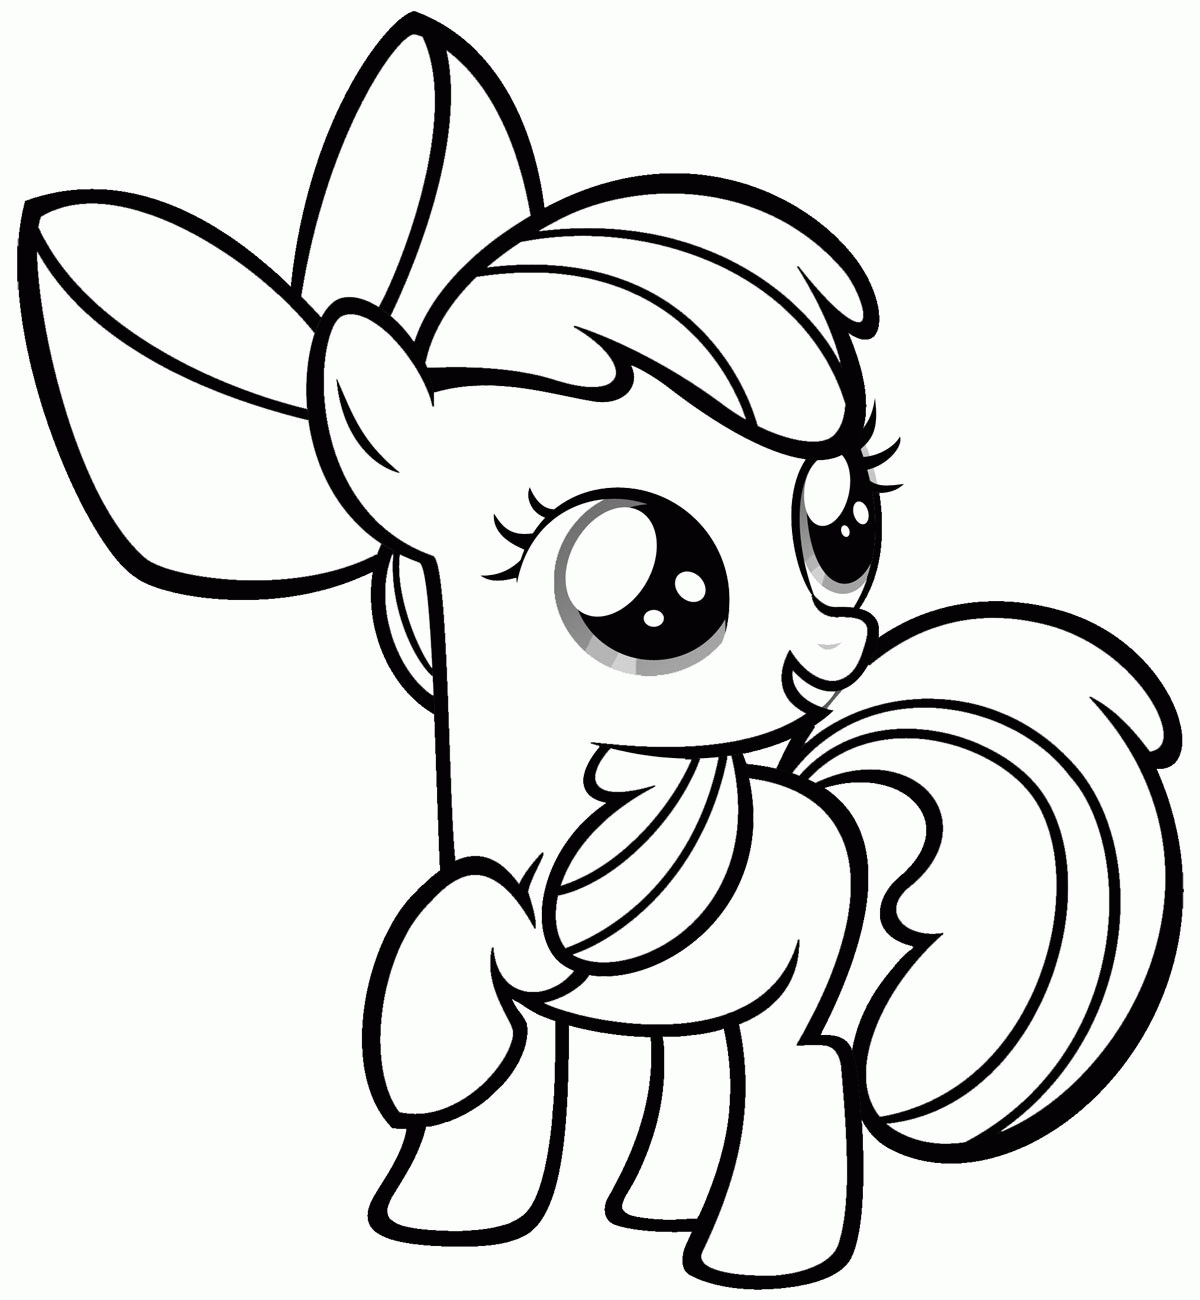 my-little-pony-coloring-page-0104-q1